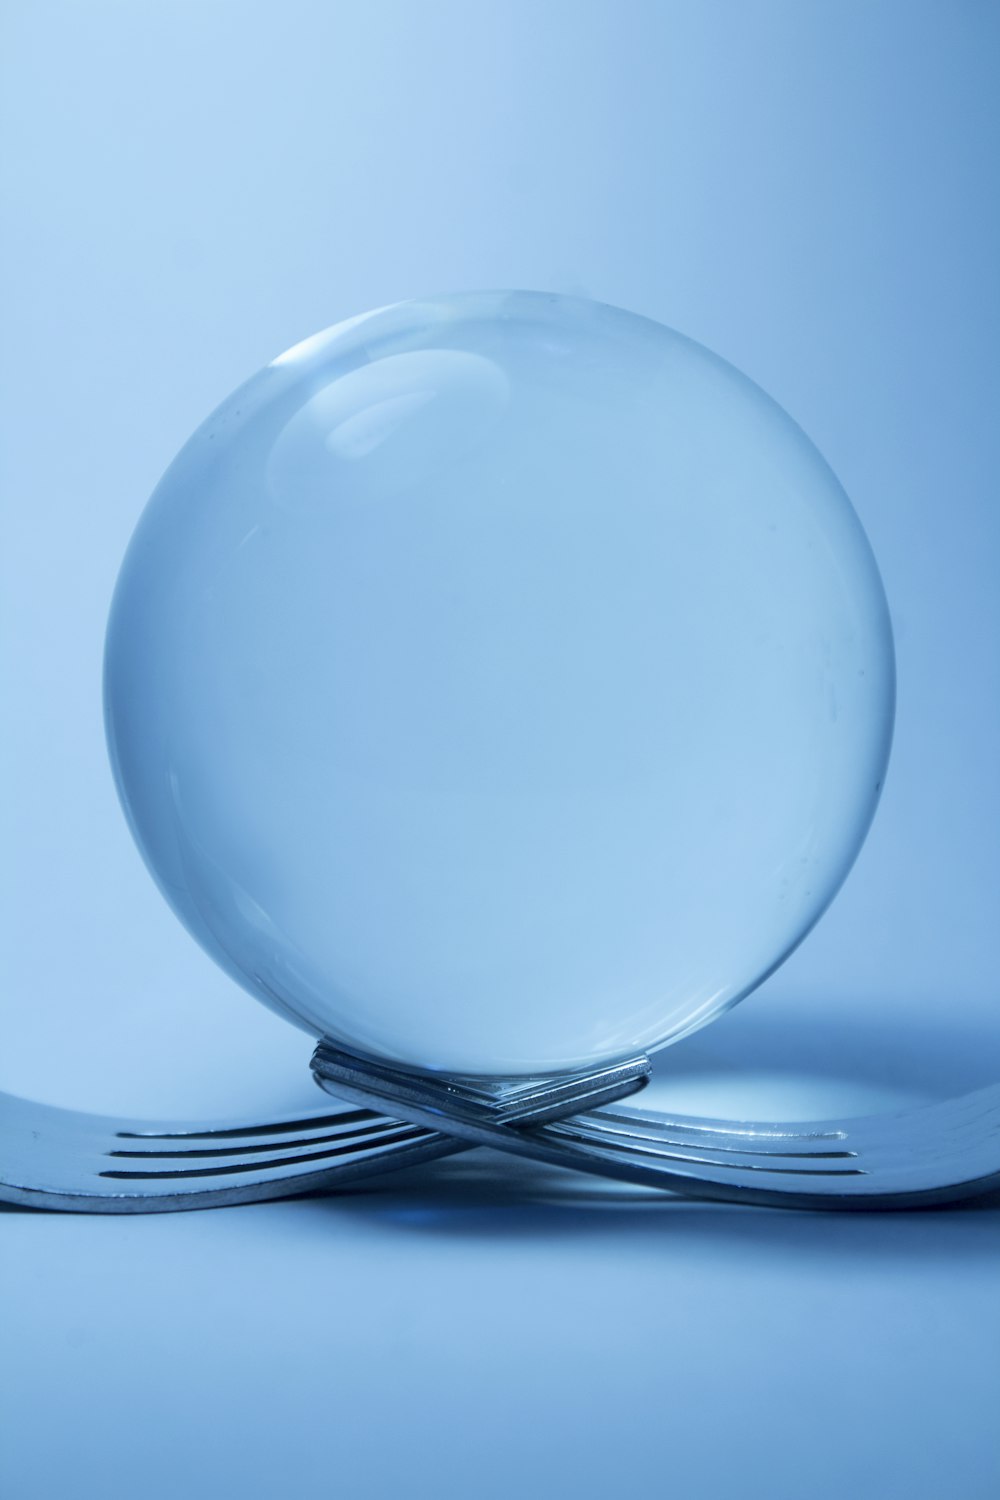 clear glass ball on top of two forks